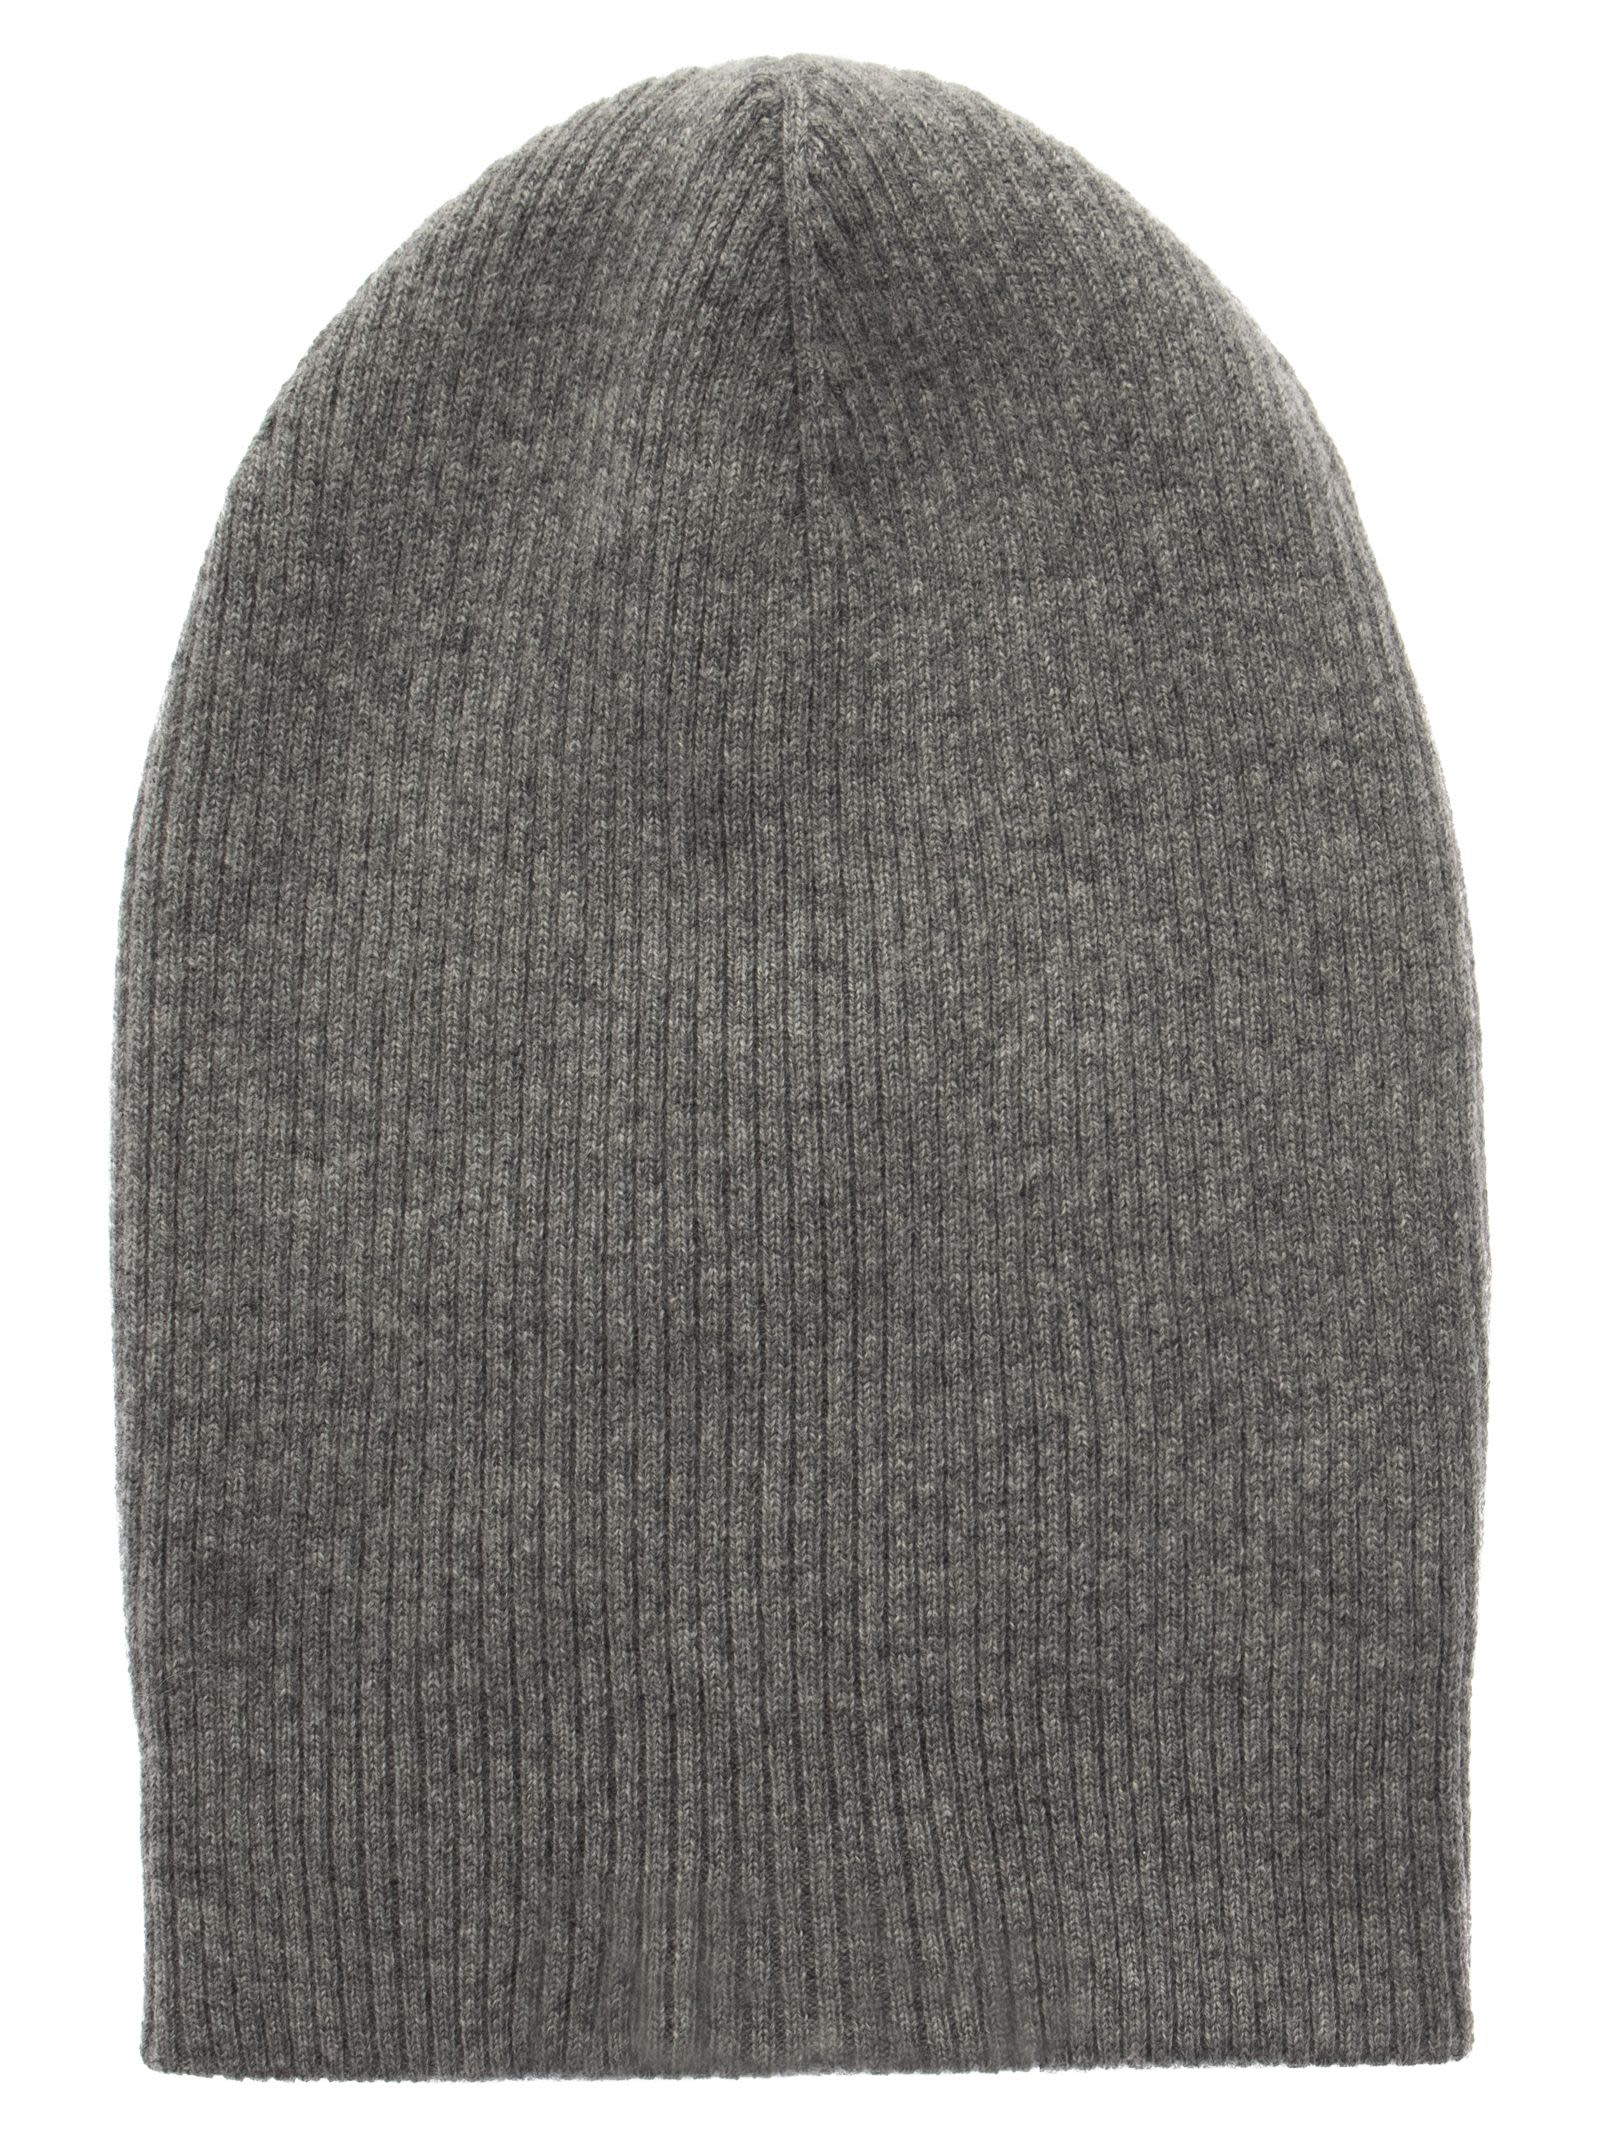 Brunello Cucinelli Cashmere Double Knit Ribbed Beanie